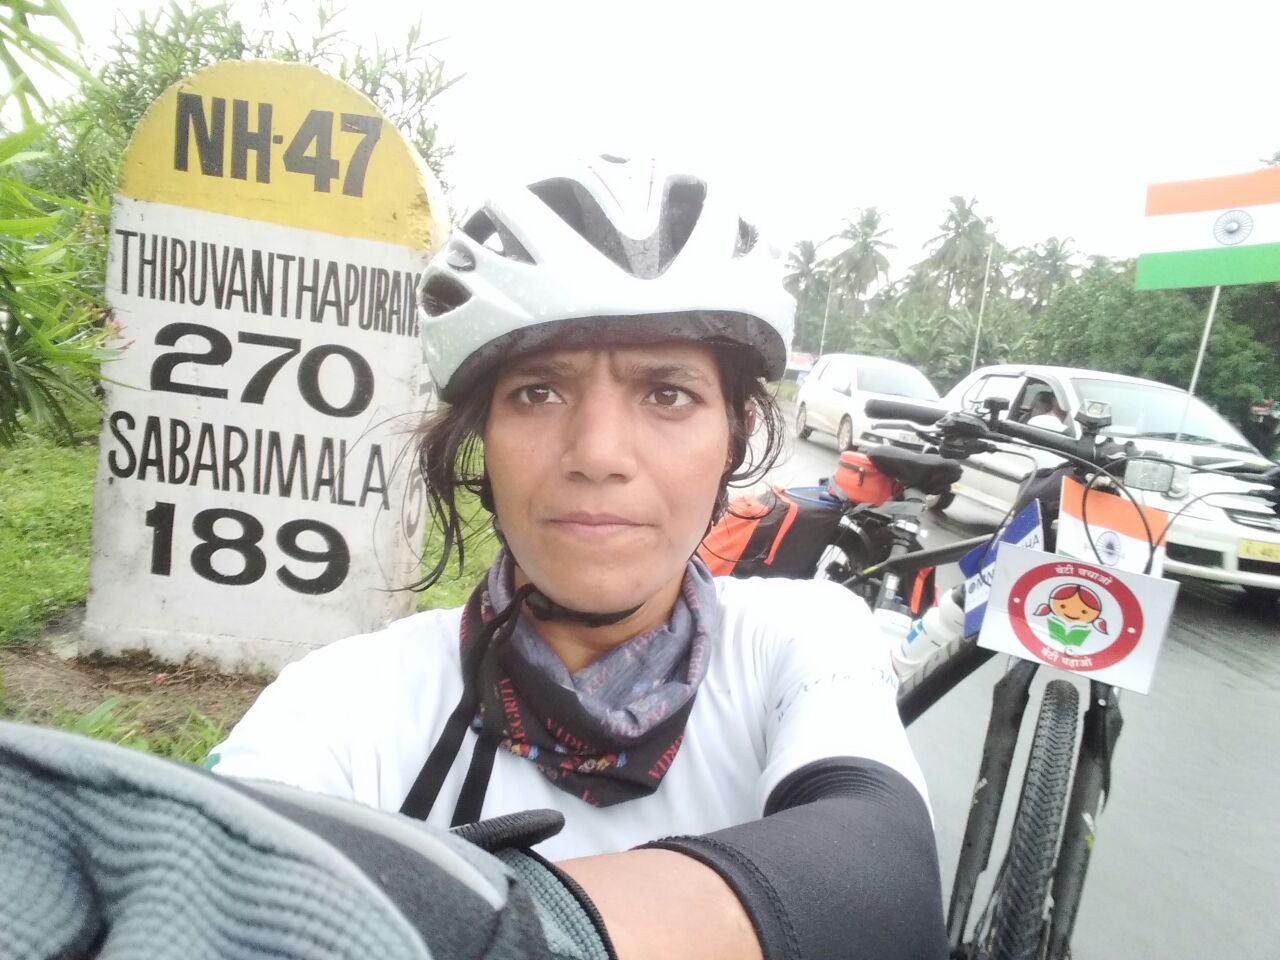 A girl with a mission on her 4th day of solo cycle expedition